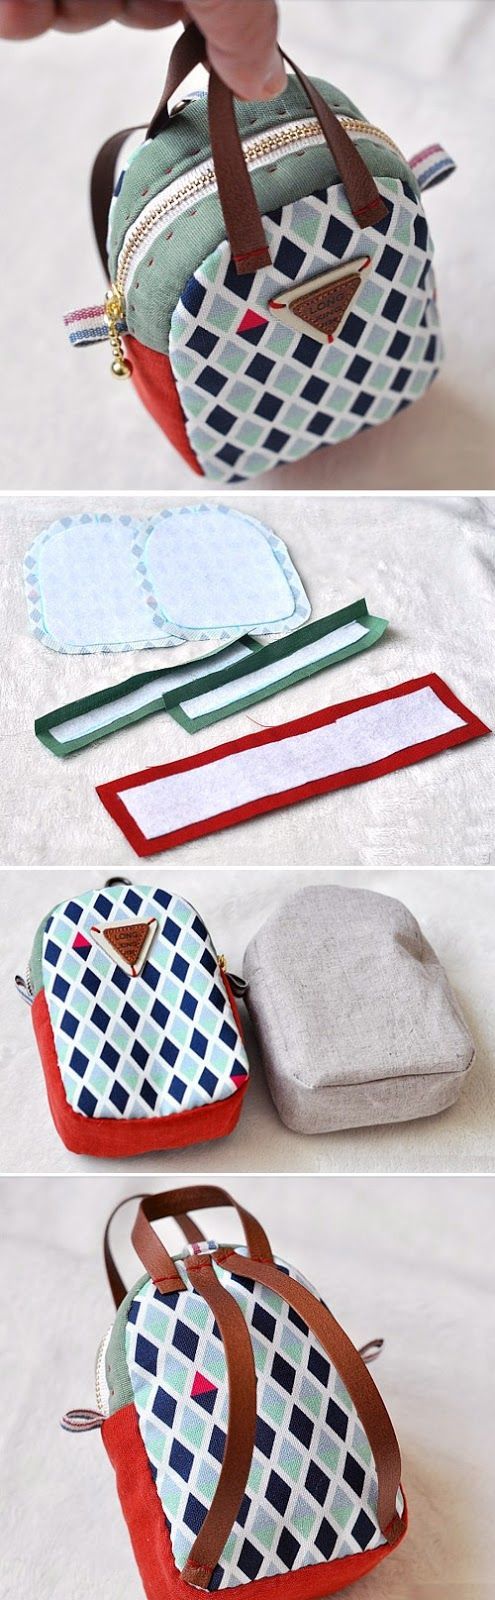 Make a Mini Back Pack Coin Purse and Key Chain. Sewing Tutorial in Pictures.  www.